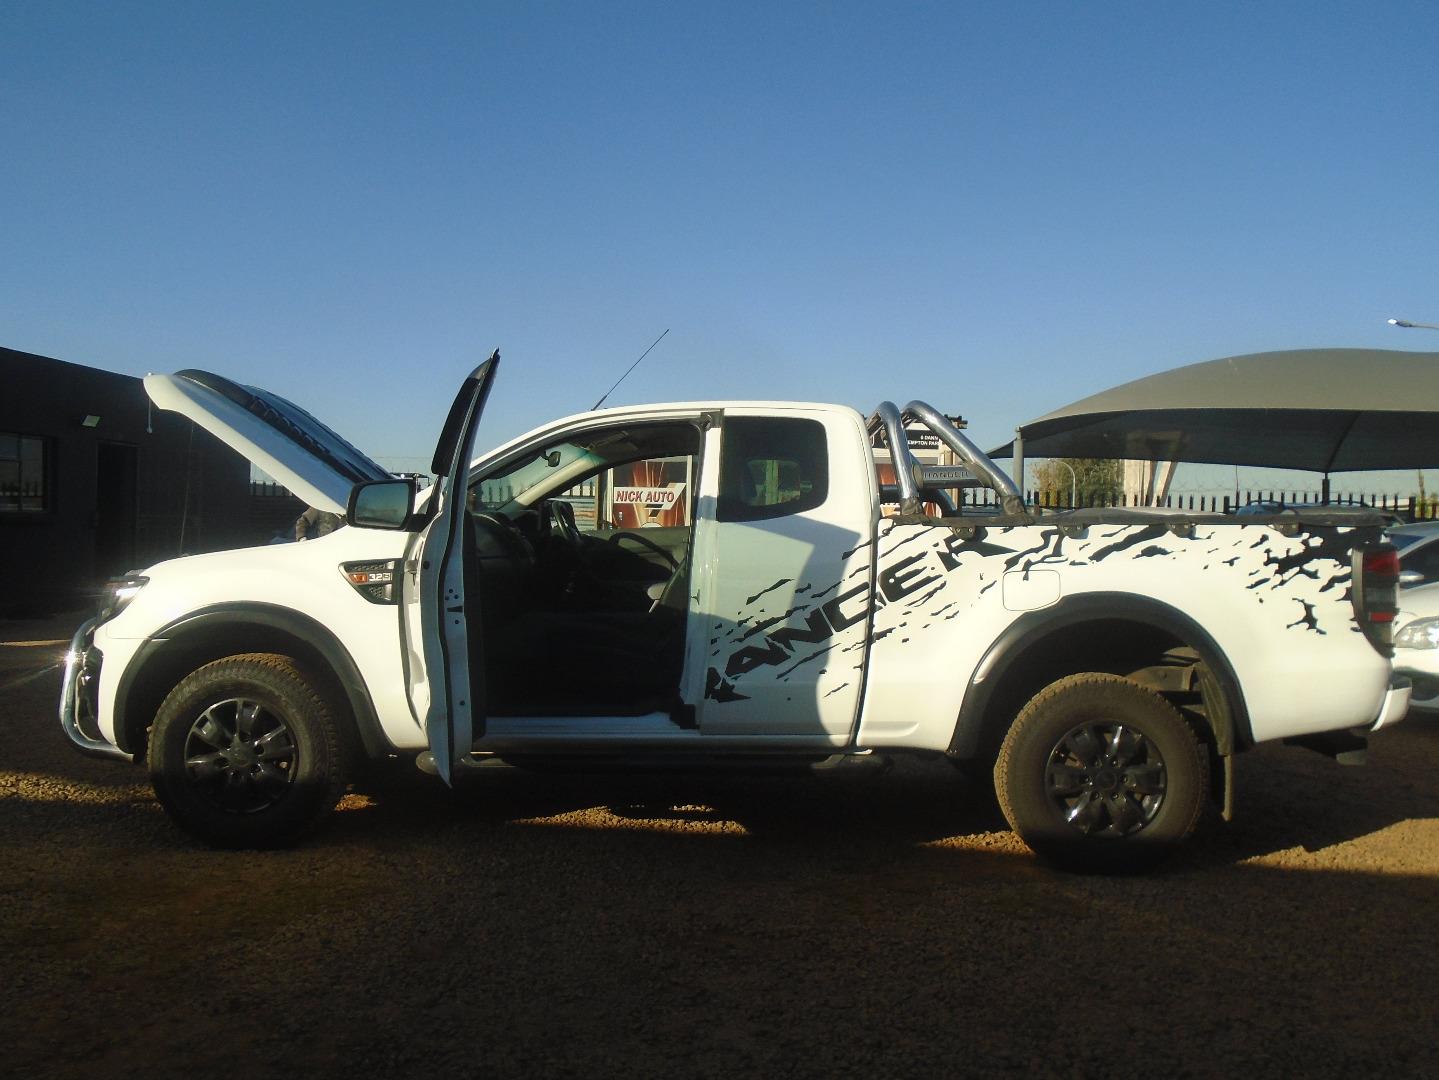 2014 FORD RANGER 2.2tdci chassis cab